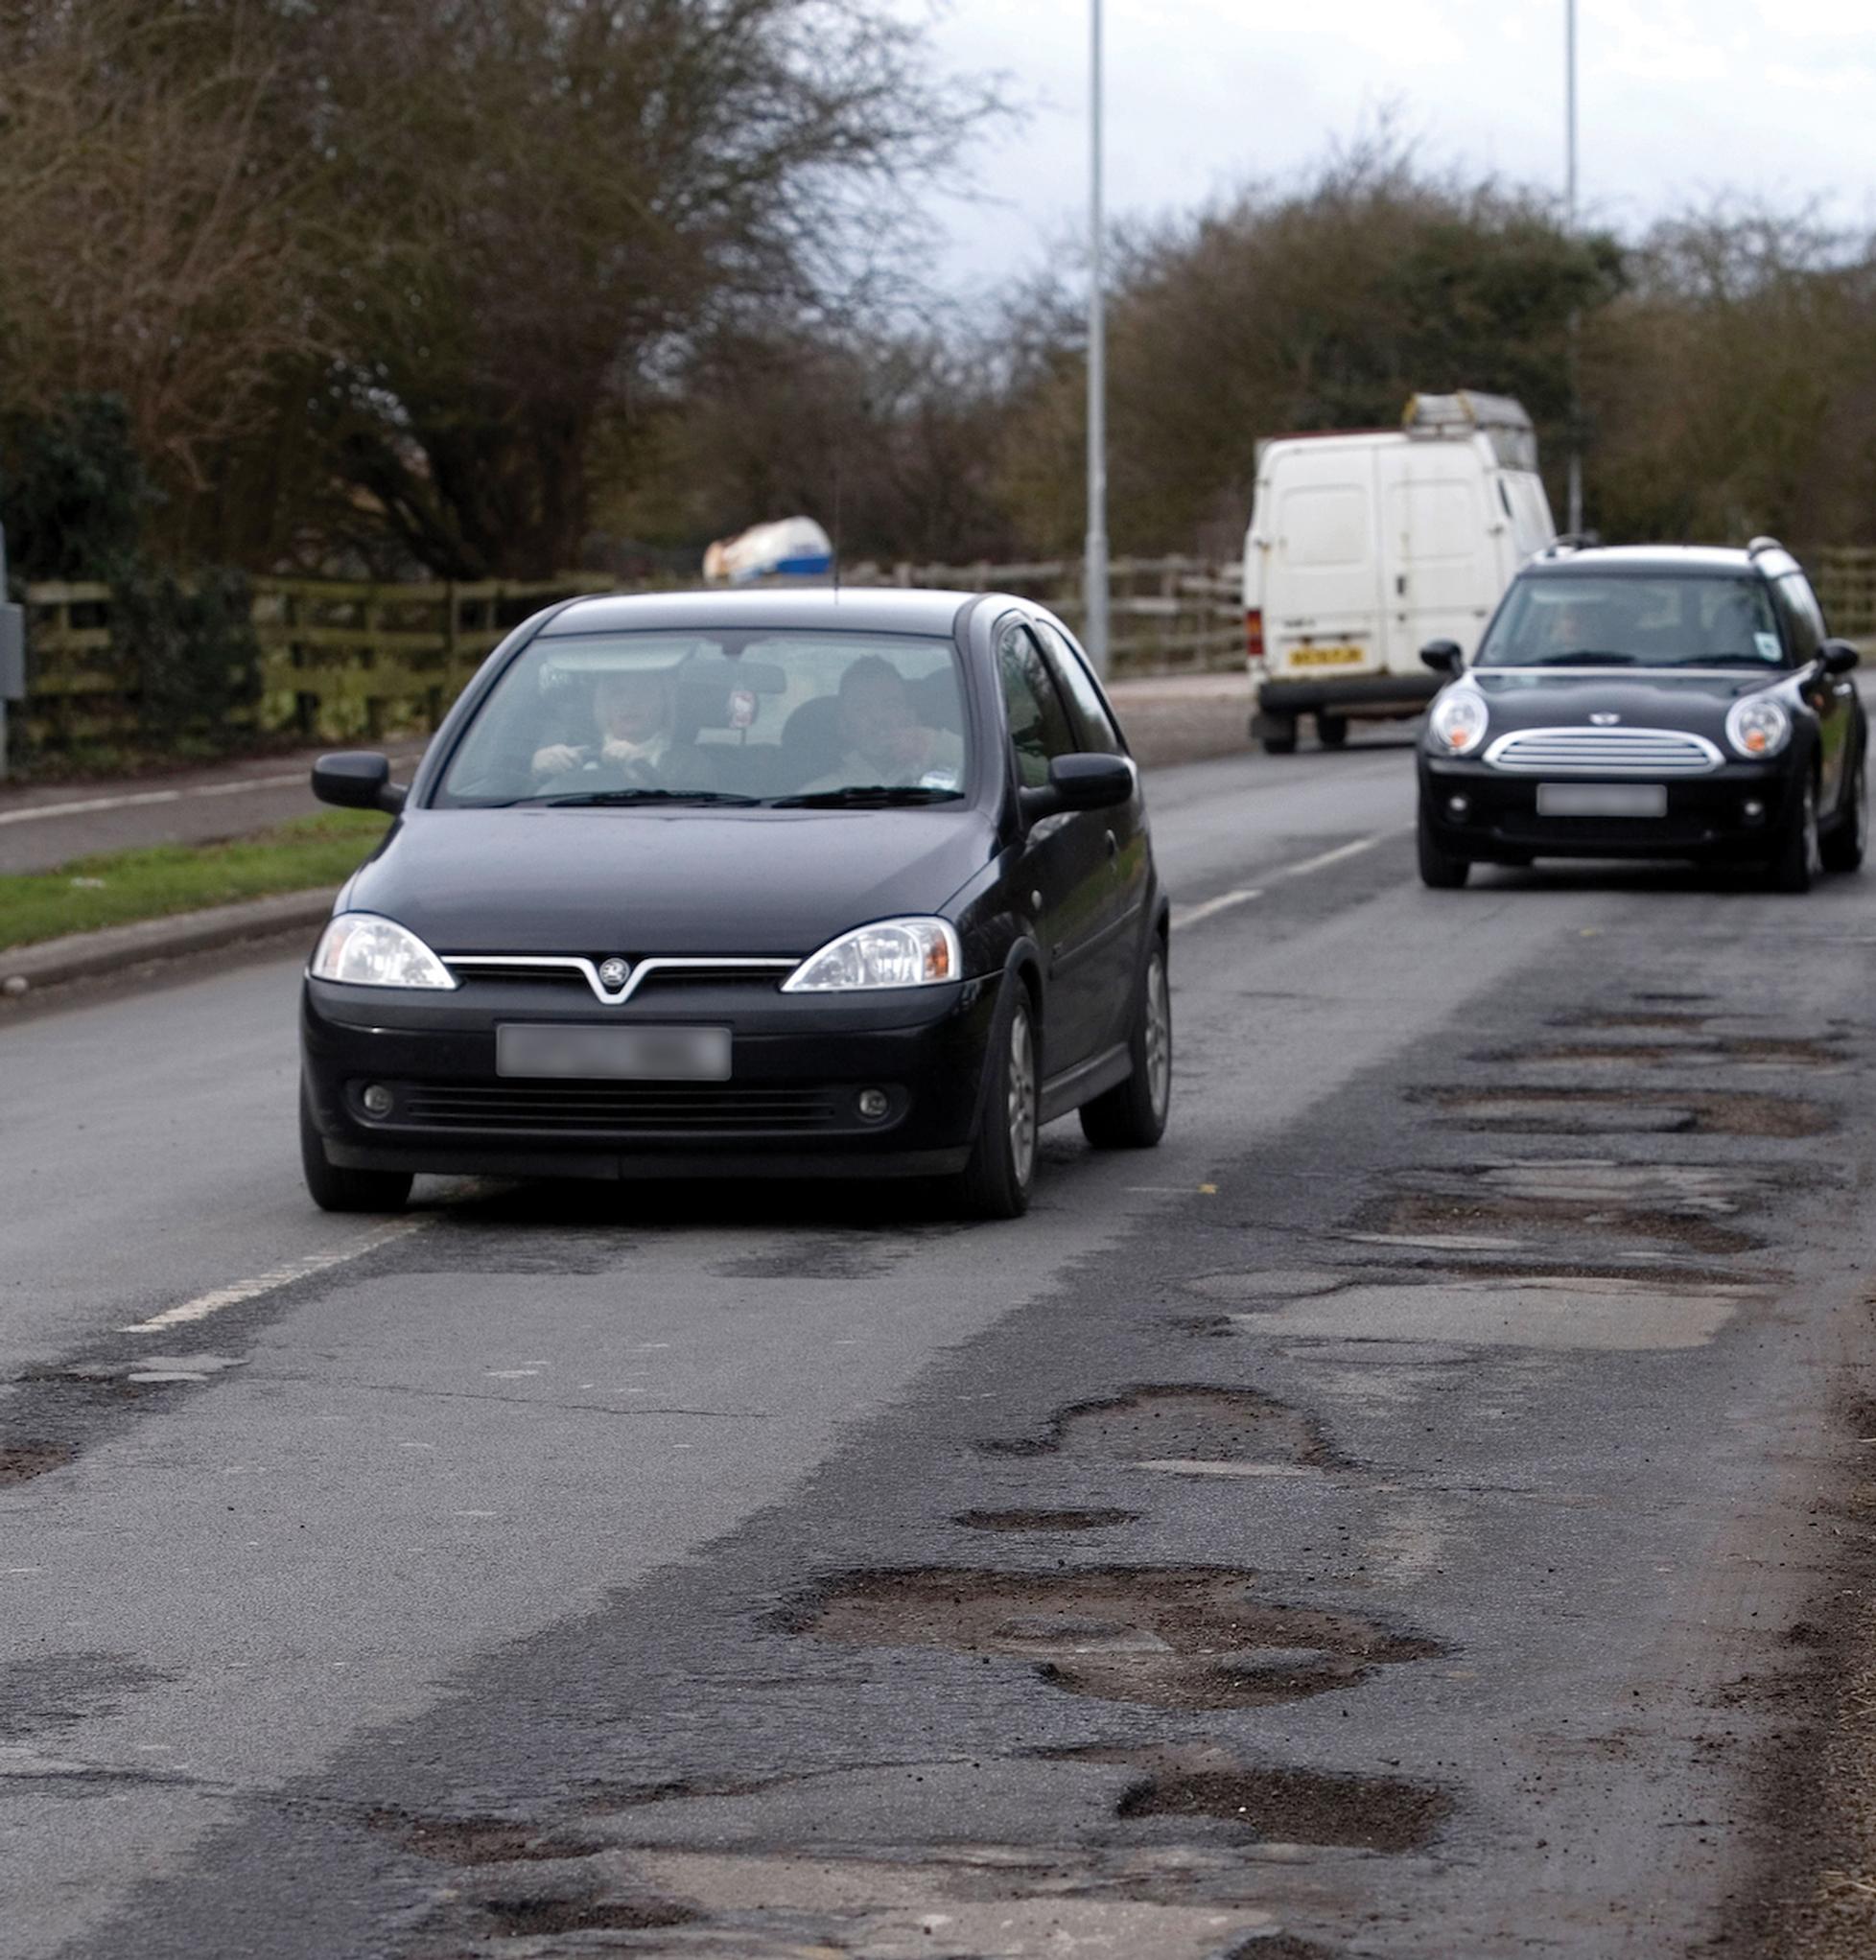 Local roads repair backlog now amounts to £14bn, reports ALARM survey